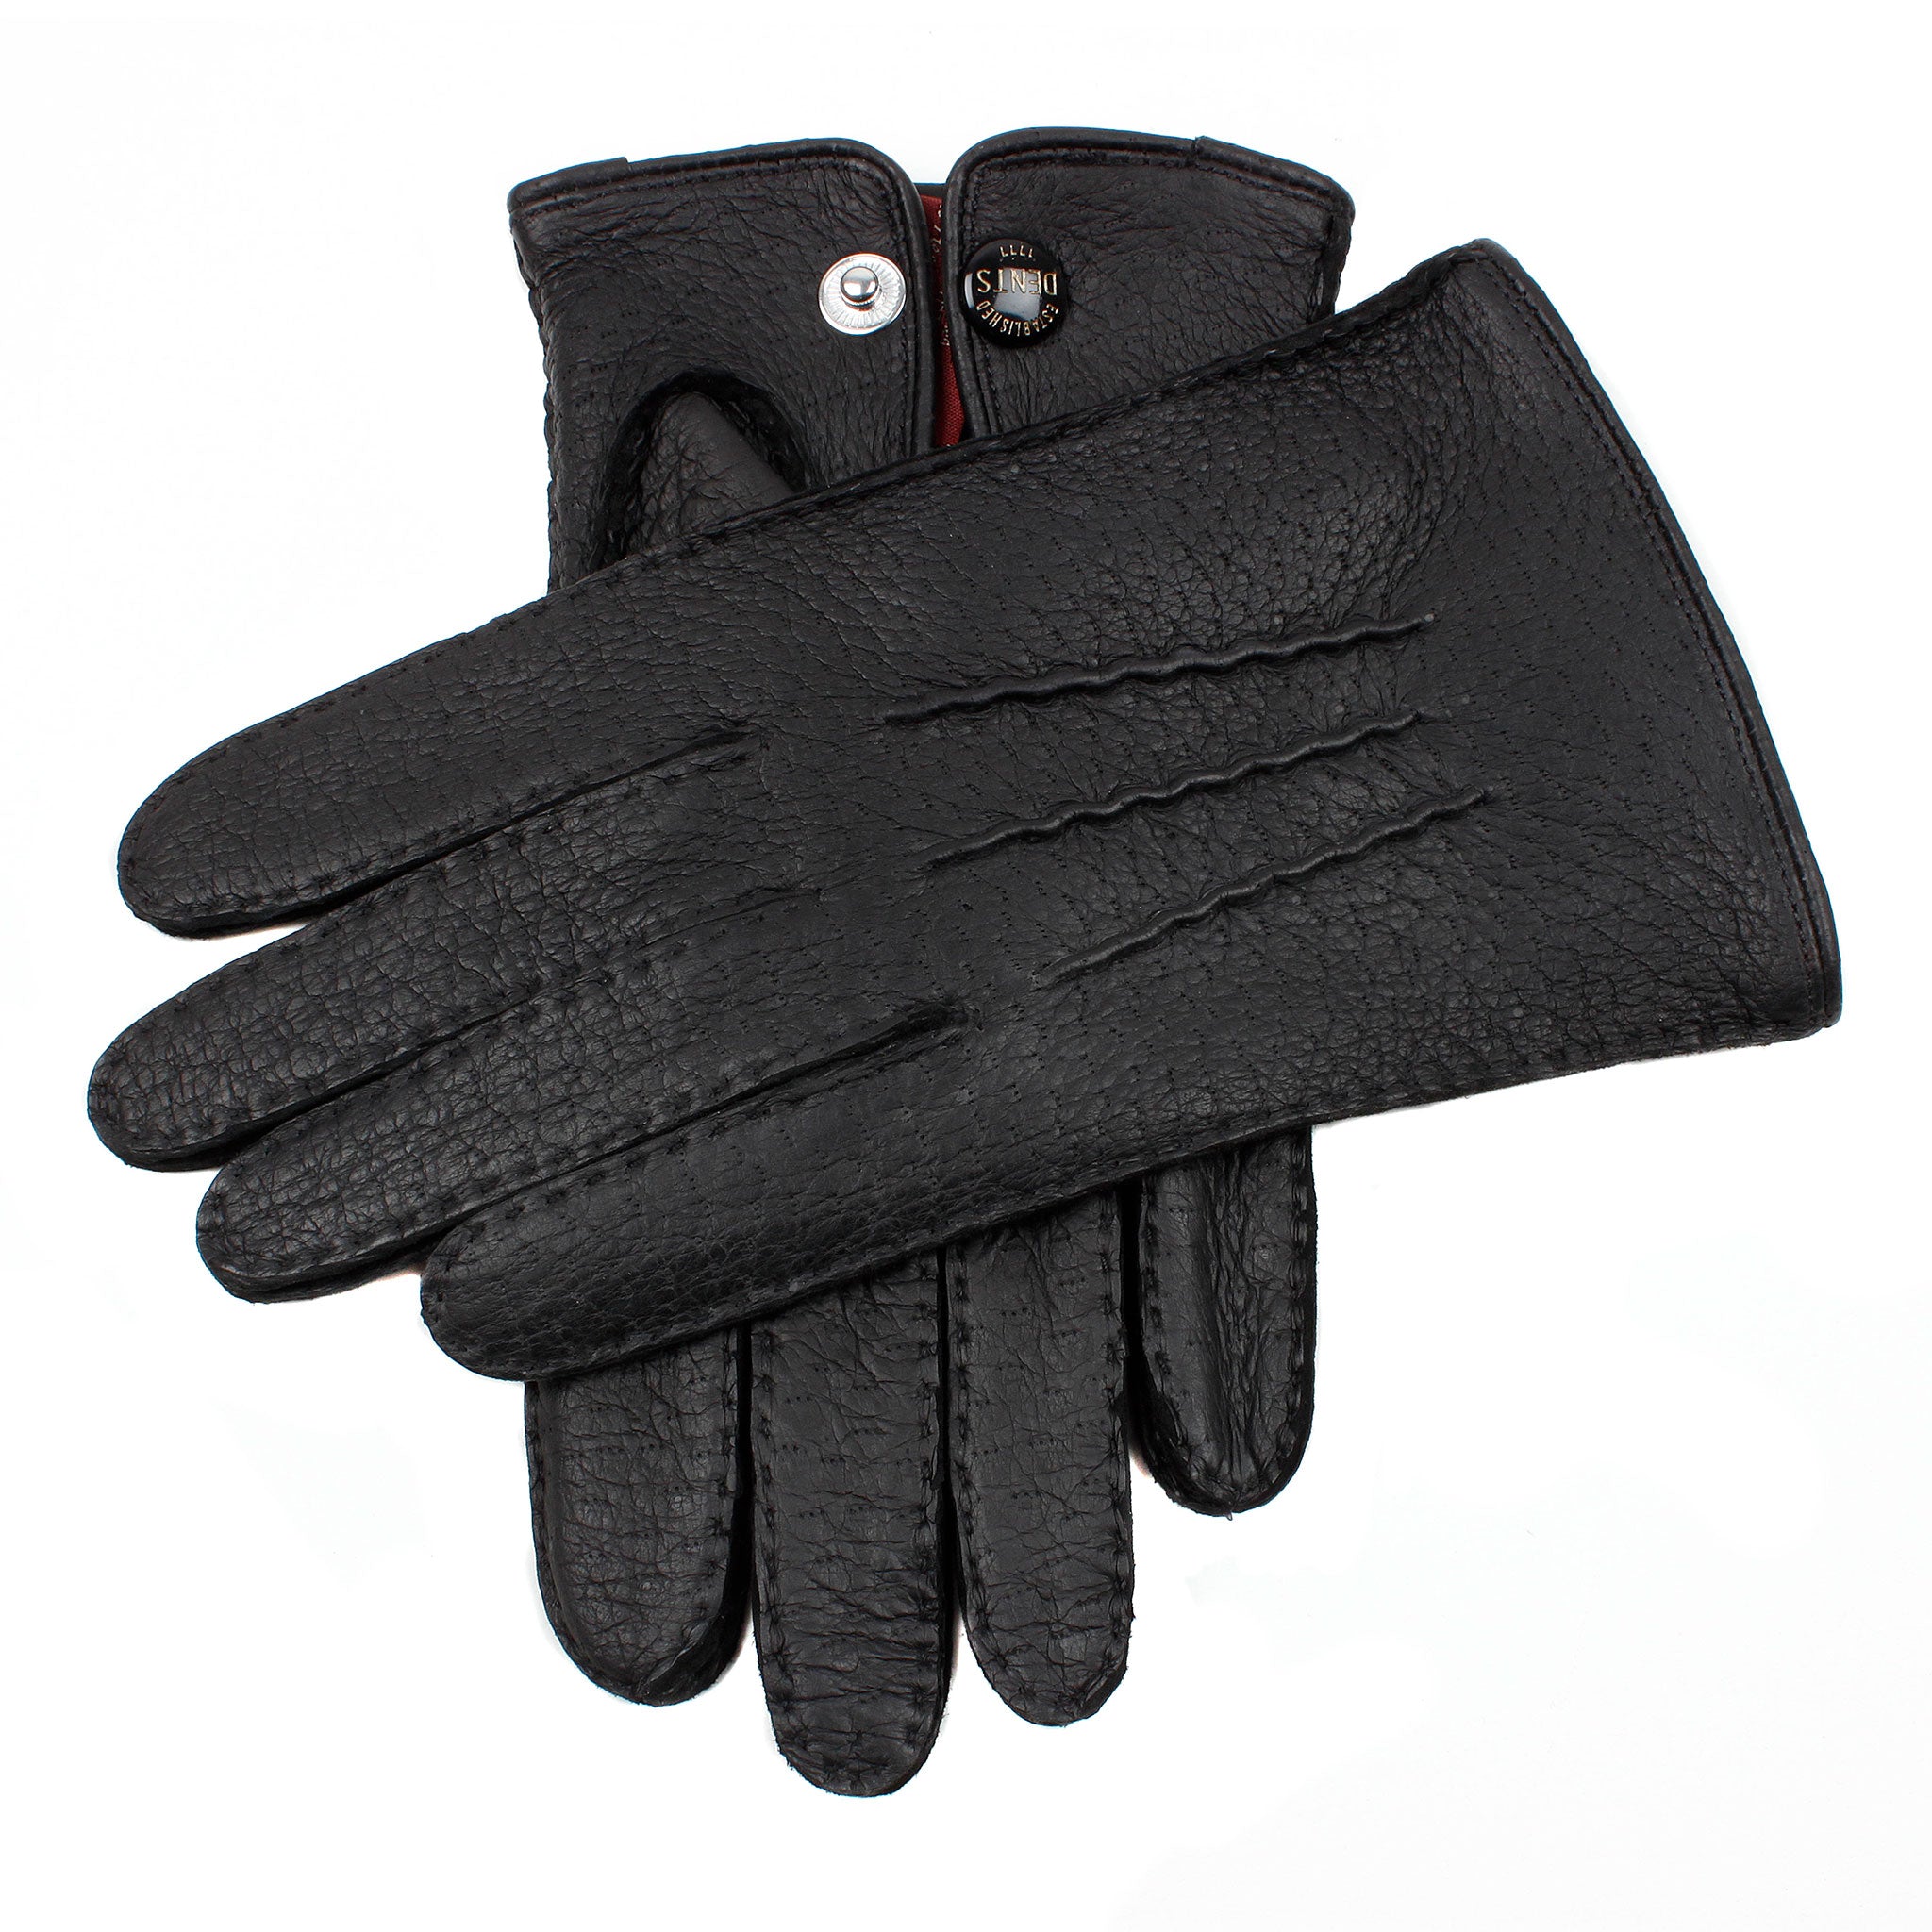 Men's Three-Point Leather Driving Gloves